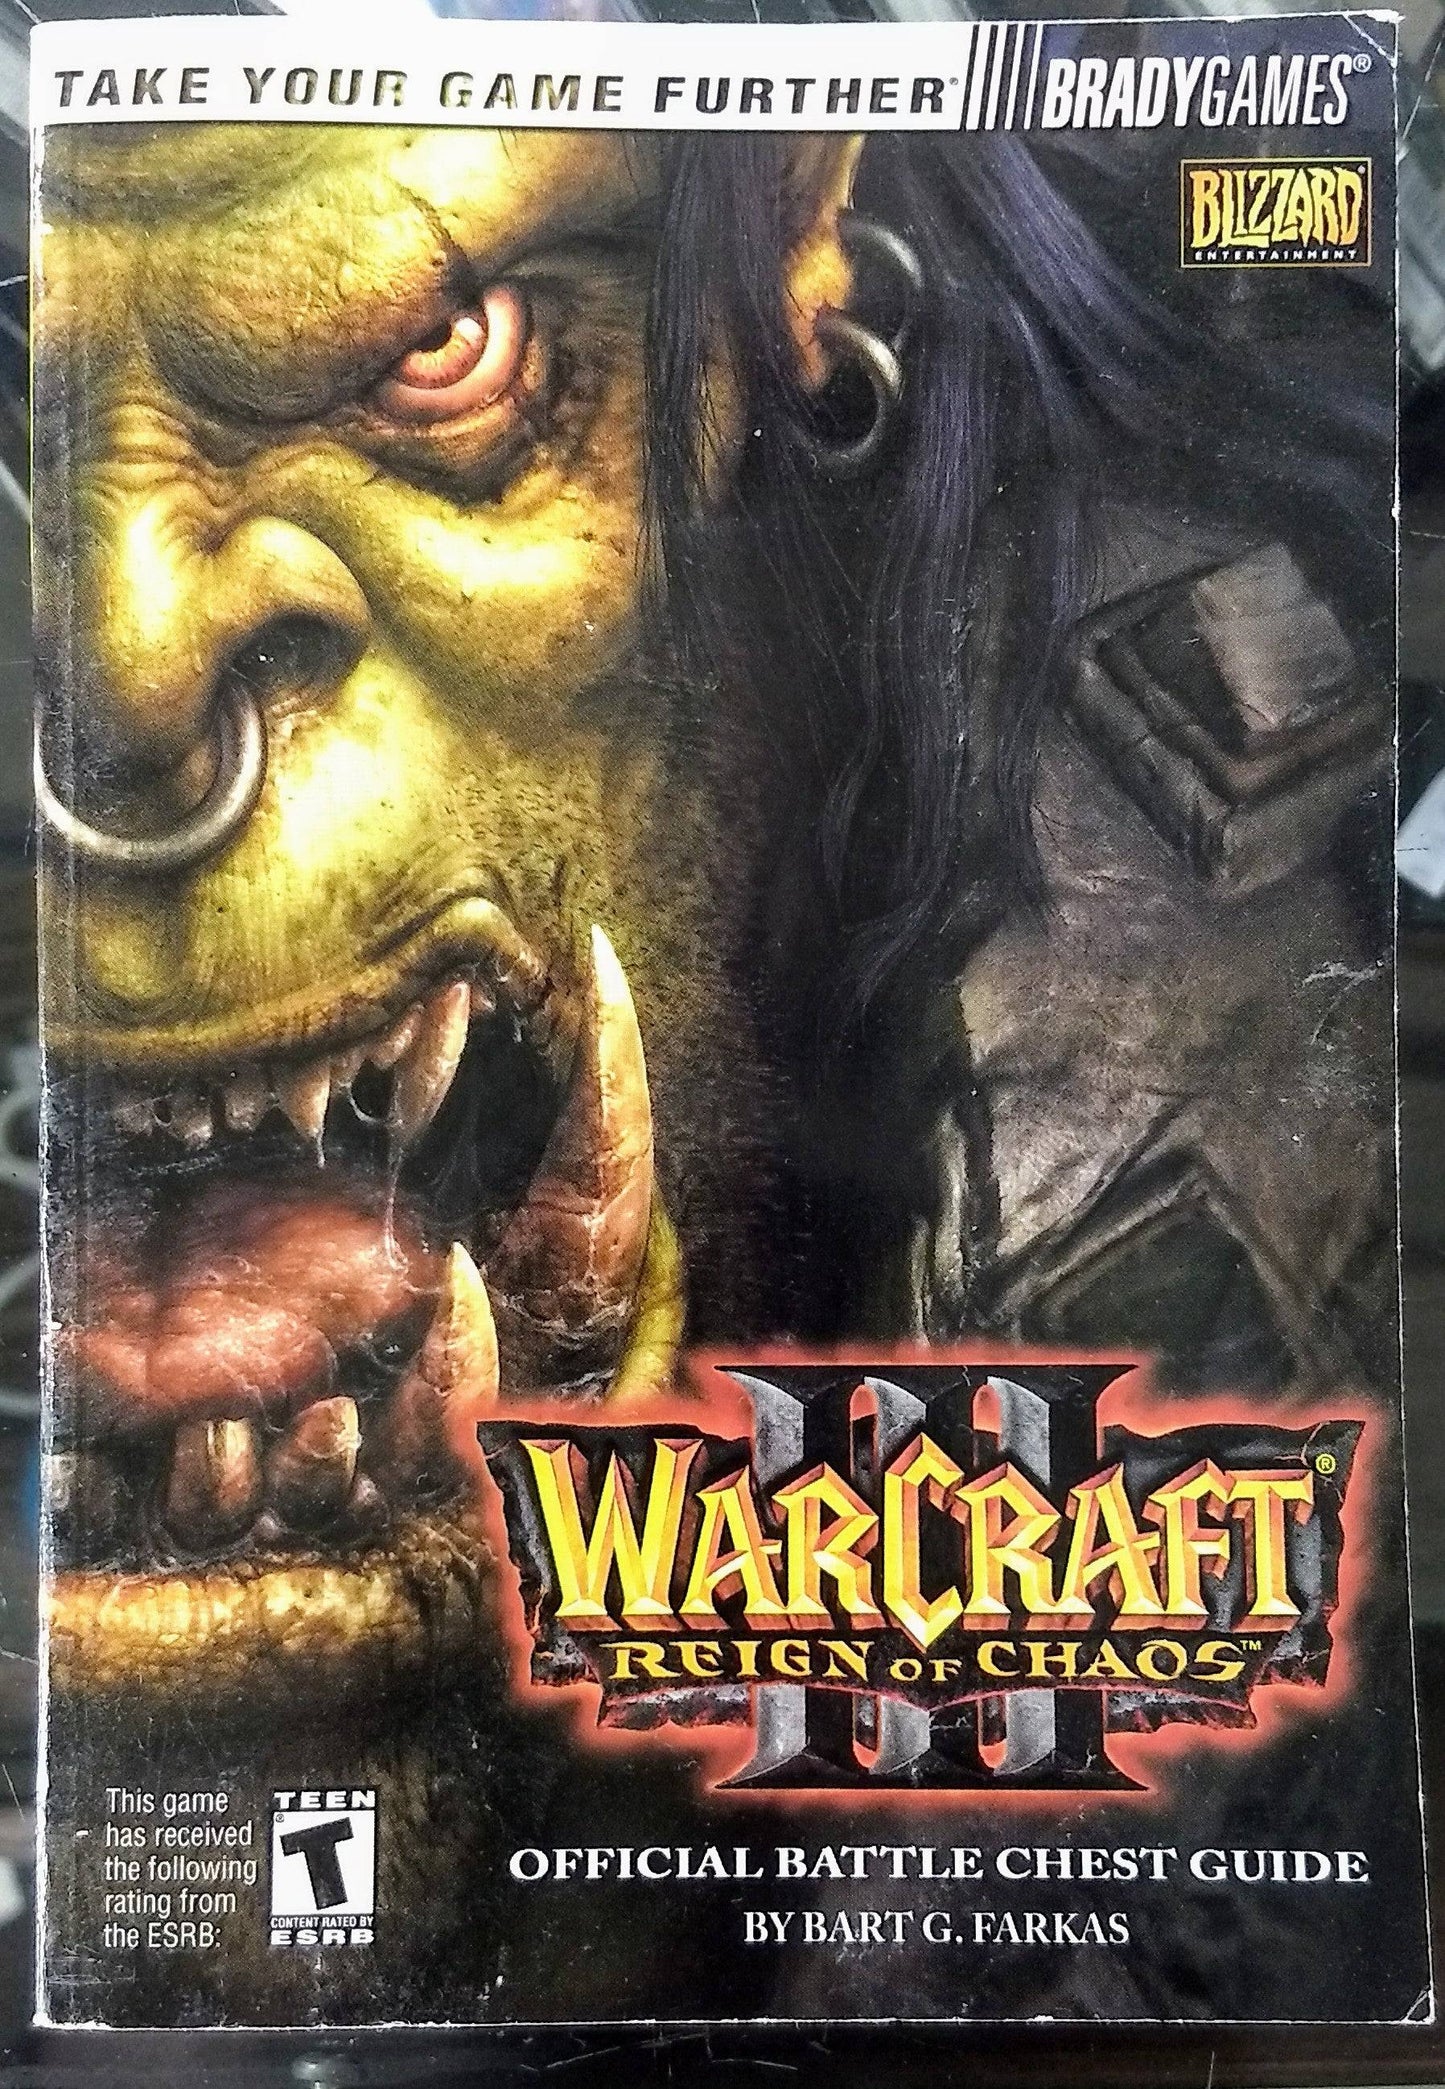 Warcraft III 3 Reign of Chaos-Official Battle Chest Guide -Brady Games -Strategy - jeux video game-x